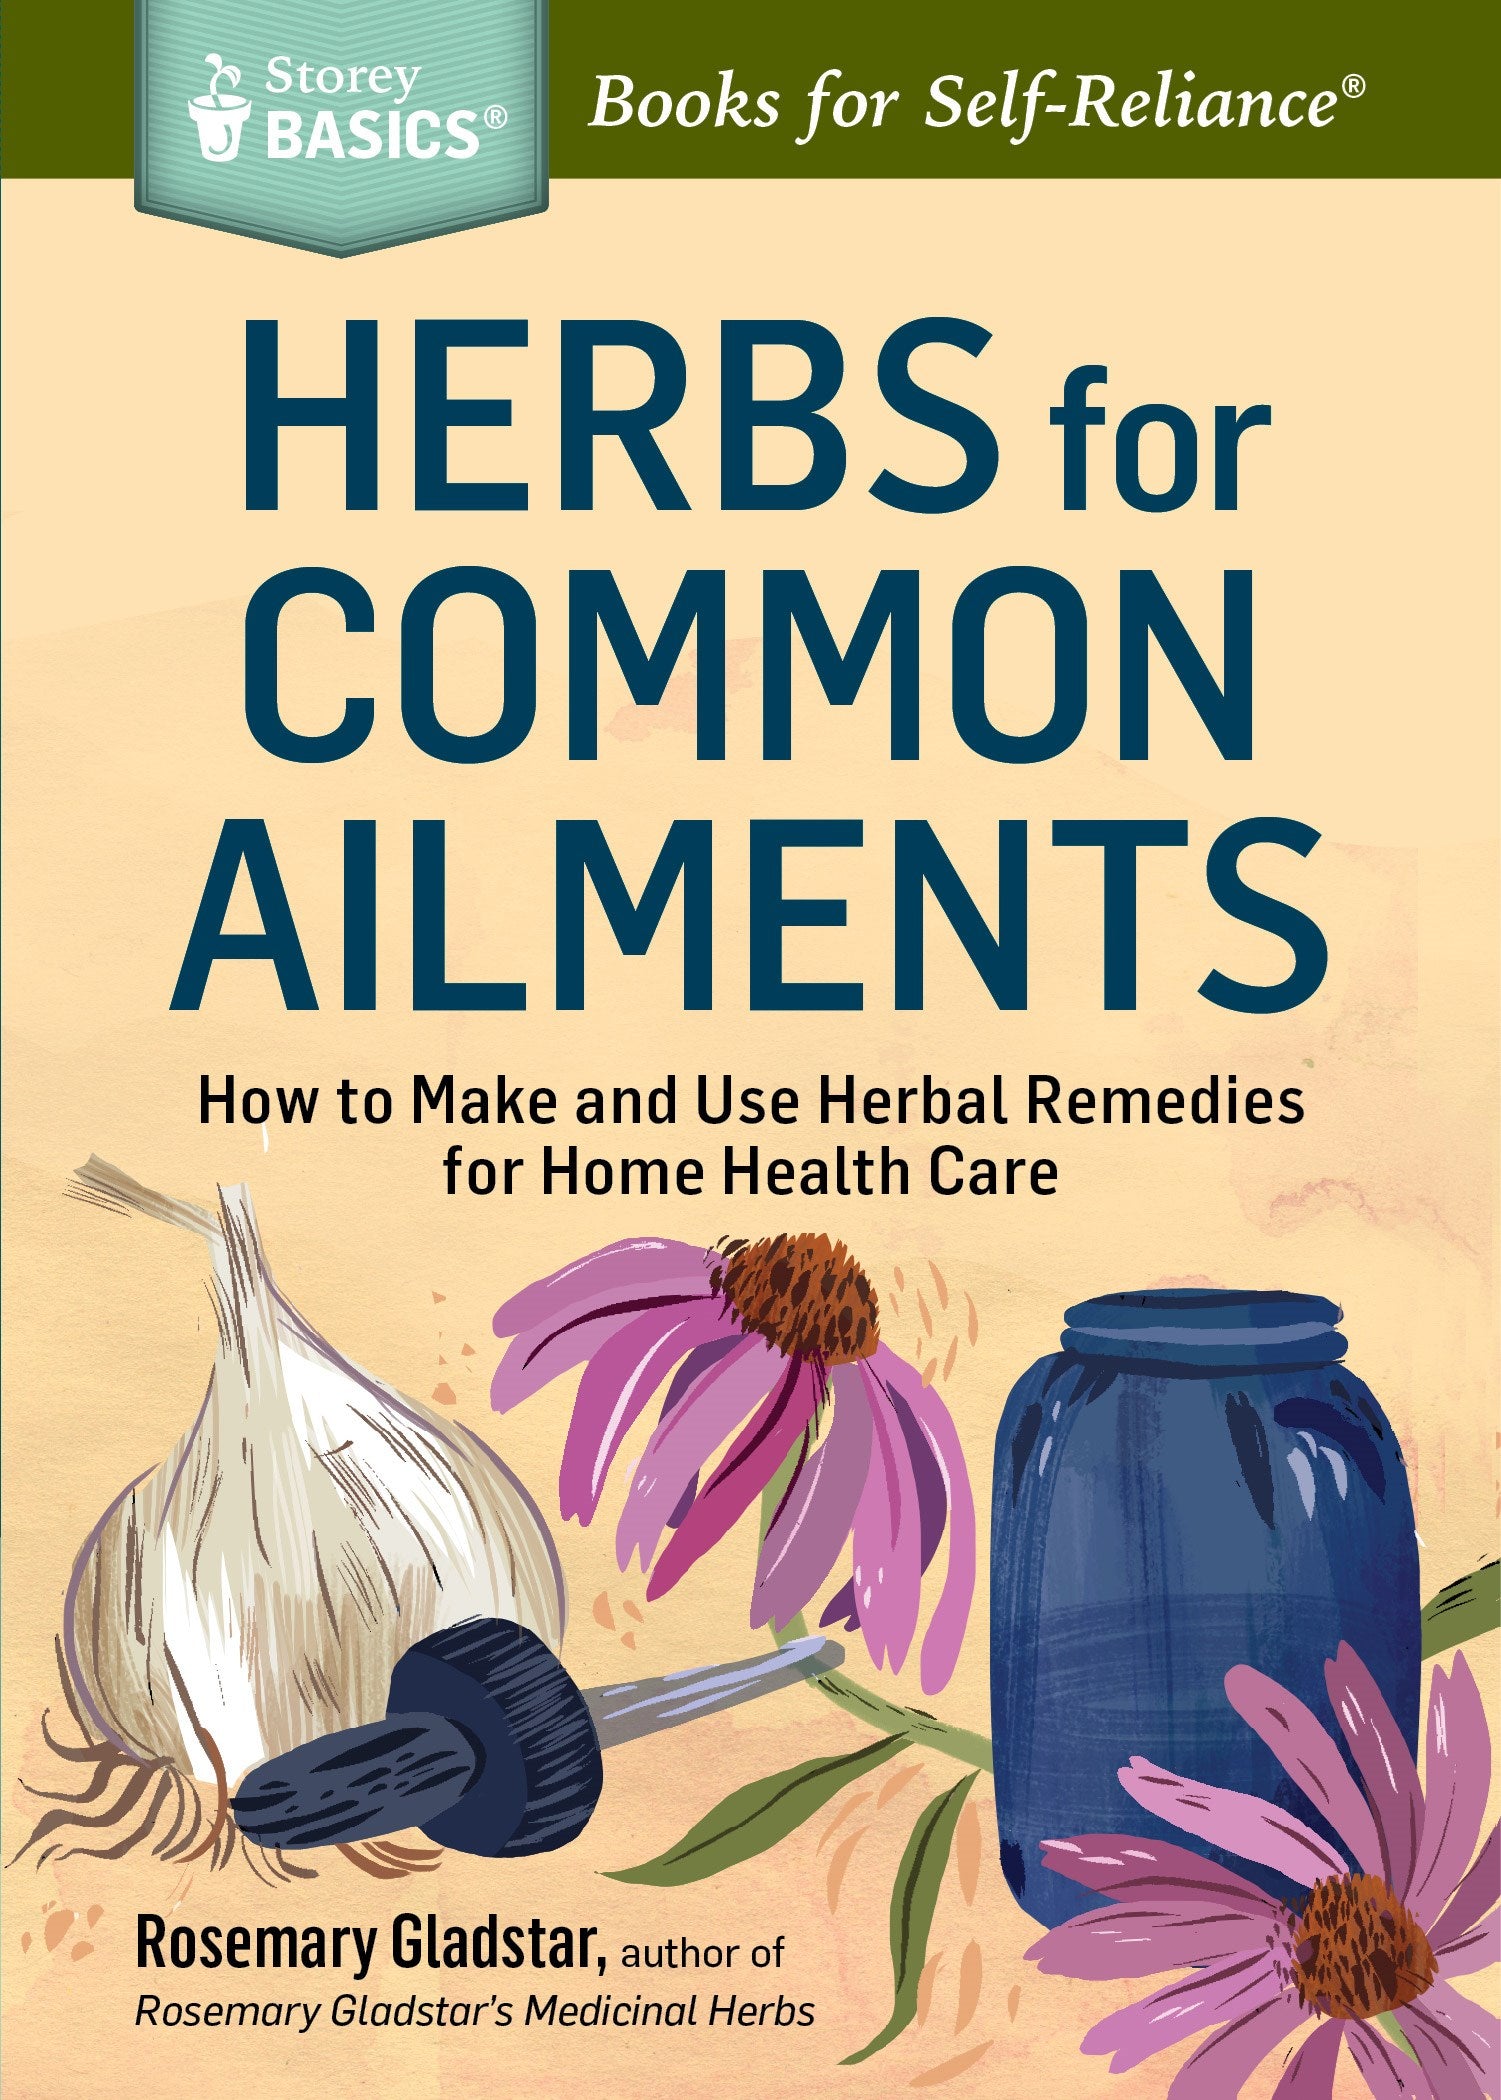 Herbs for Common Ailments: How to Make and Use Herbal Remedies for Home Health Care. A Storey BASICS® Title (New edition)